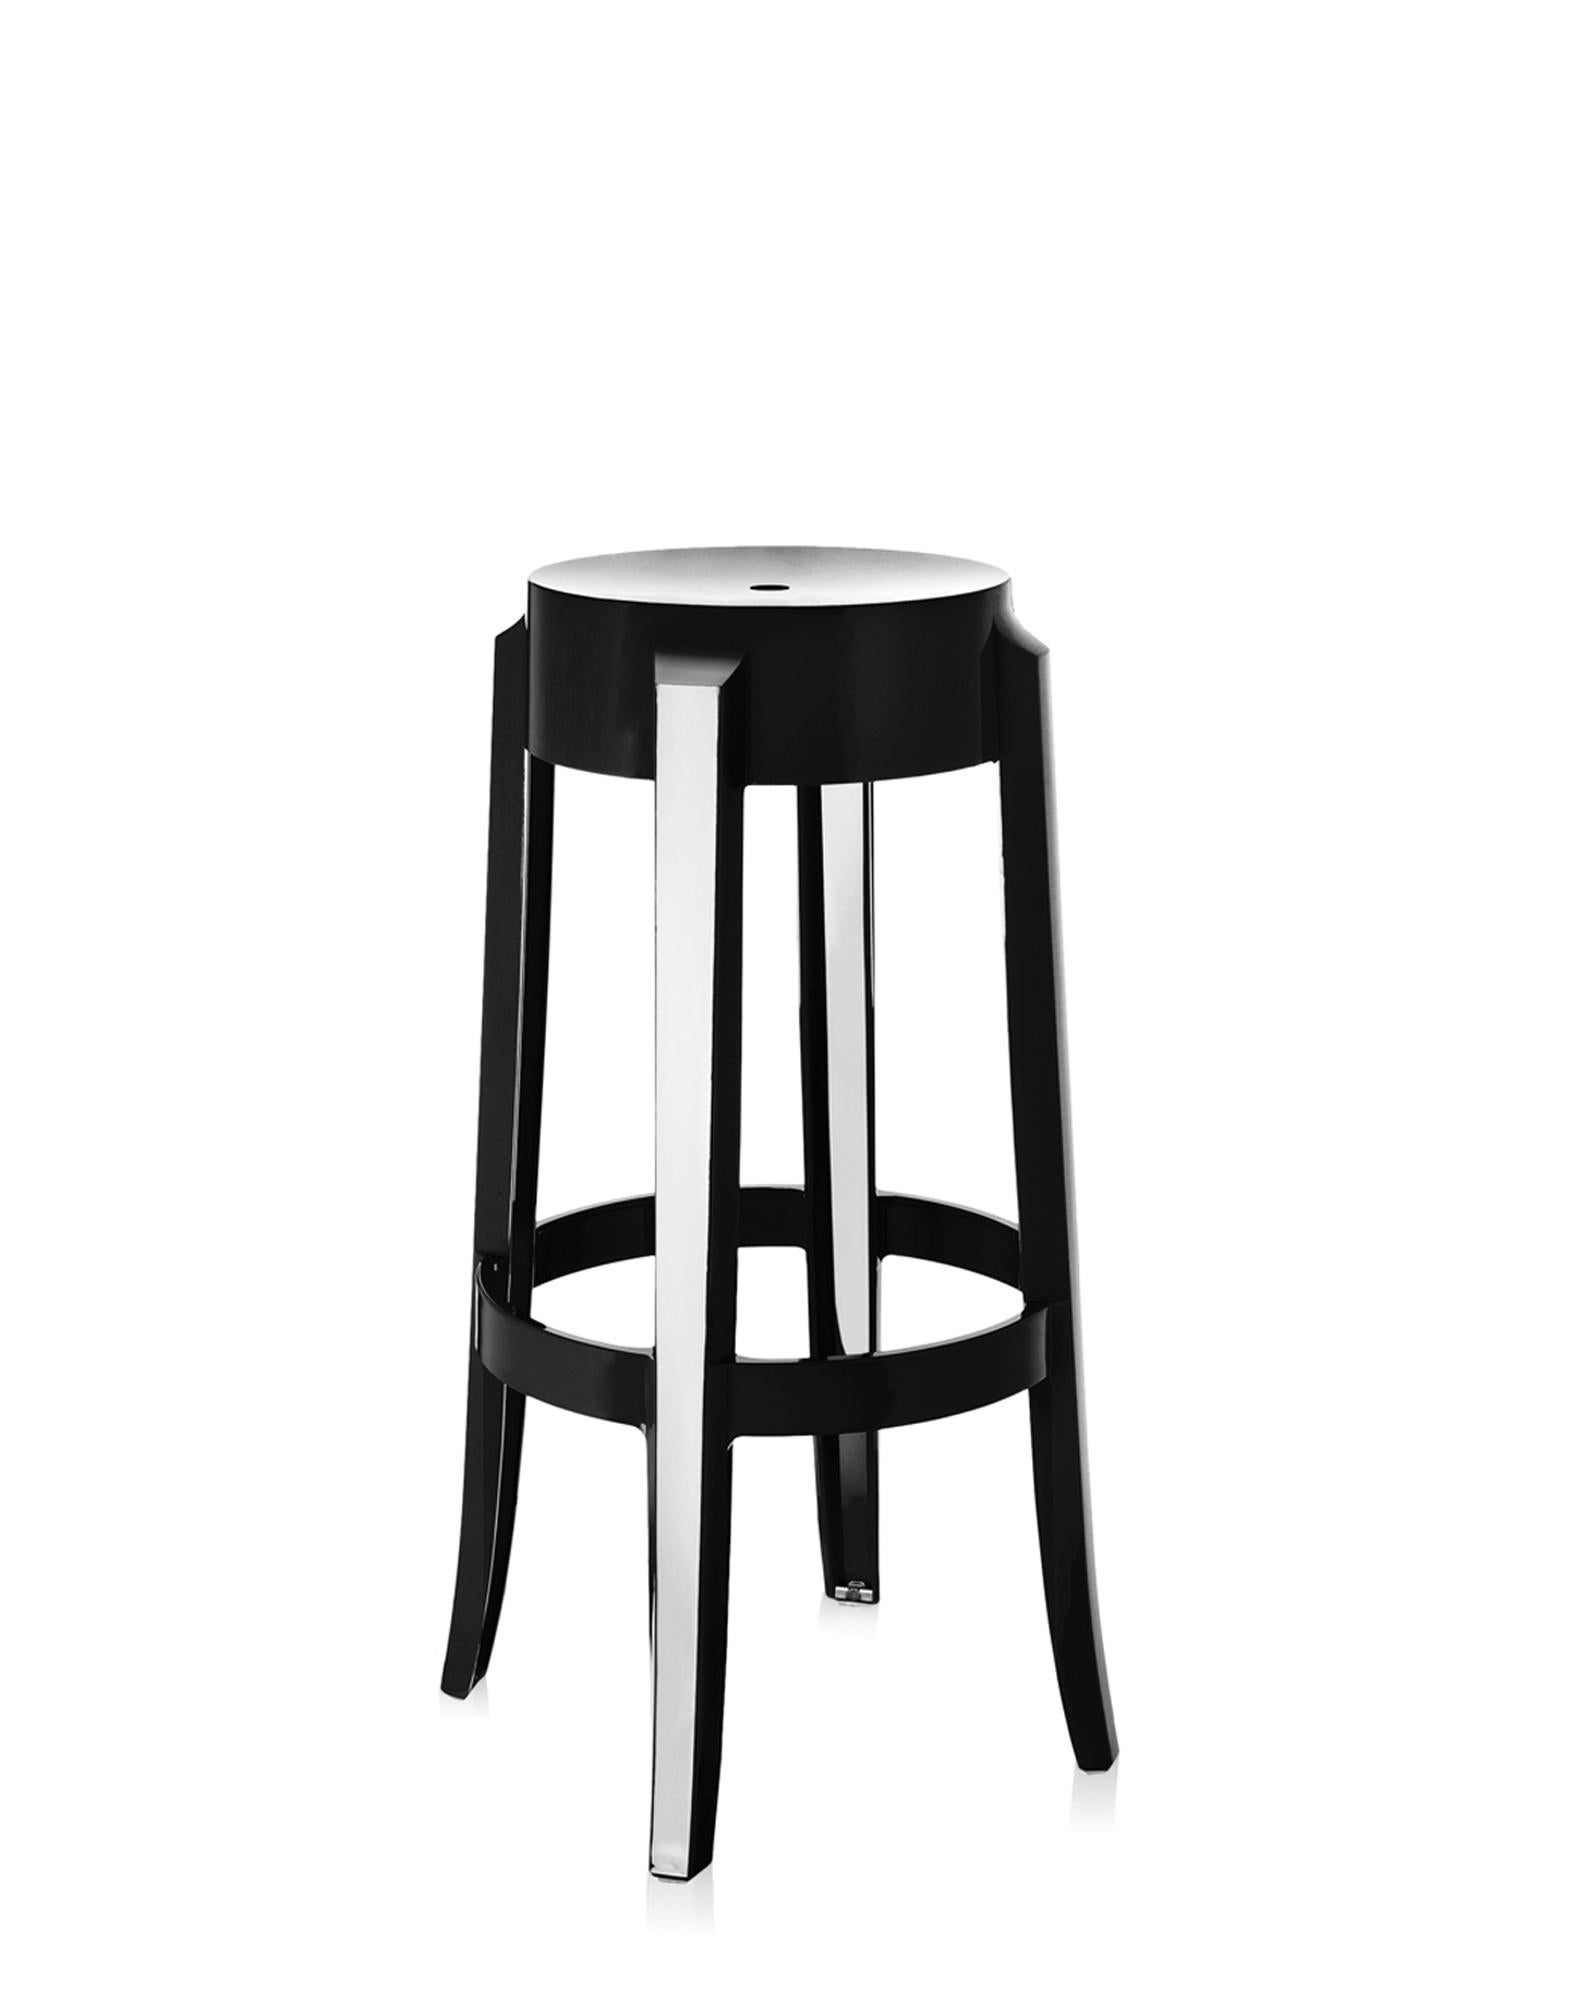 The shape conjures up stools of the 1800s and the line of the legs is rounded and slightly upturned, an icon of the classic high stool. Charles Ghost is constructed from a single block of transparent polycarbonate which makes it indestructible and